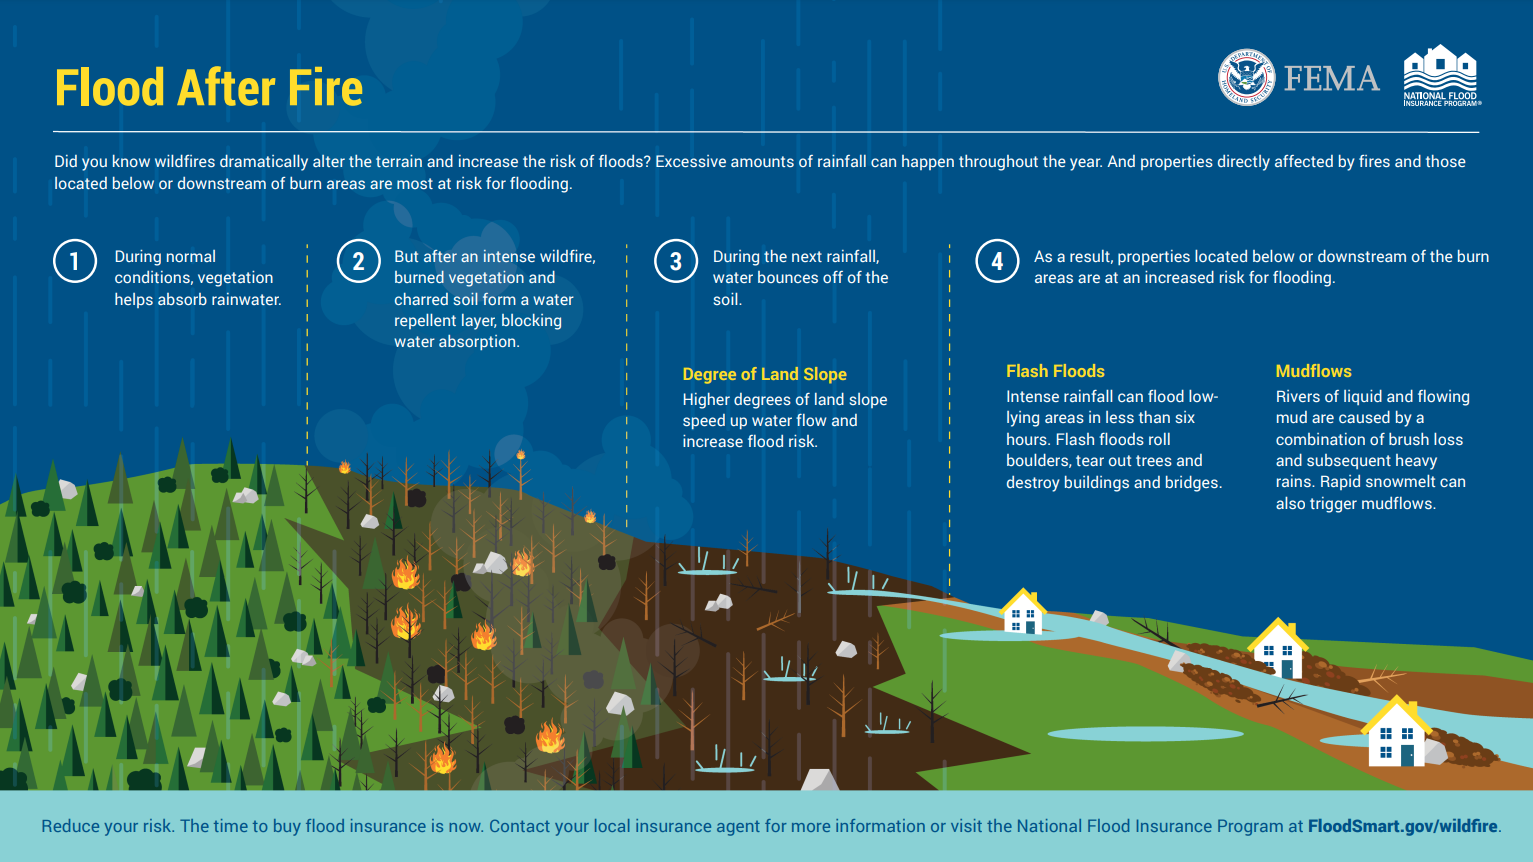 This image is a flood after fire infographic provided by FEMA describing how fires can lead to flash floods and mudflows